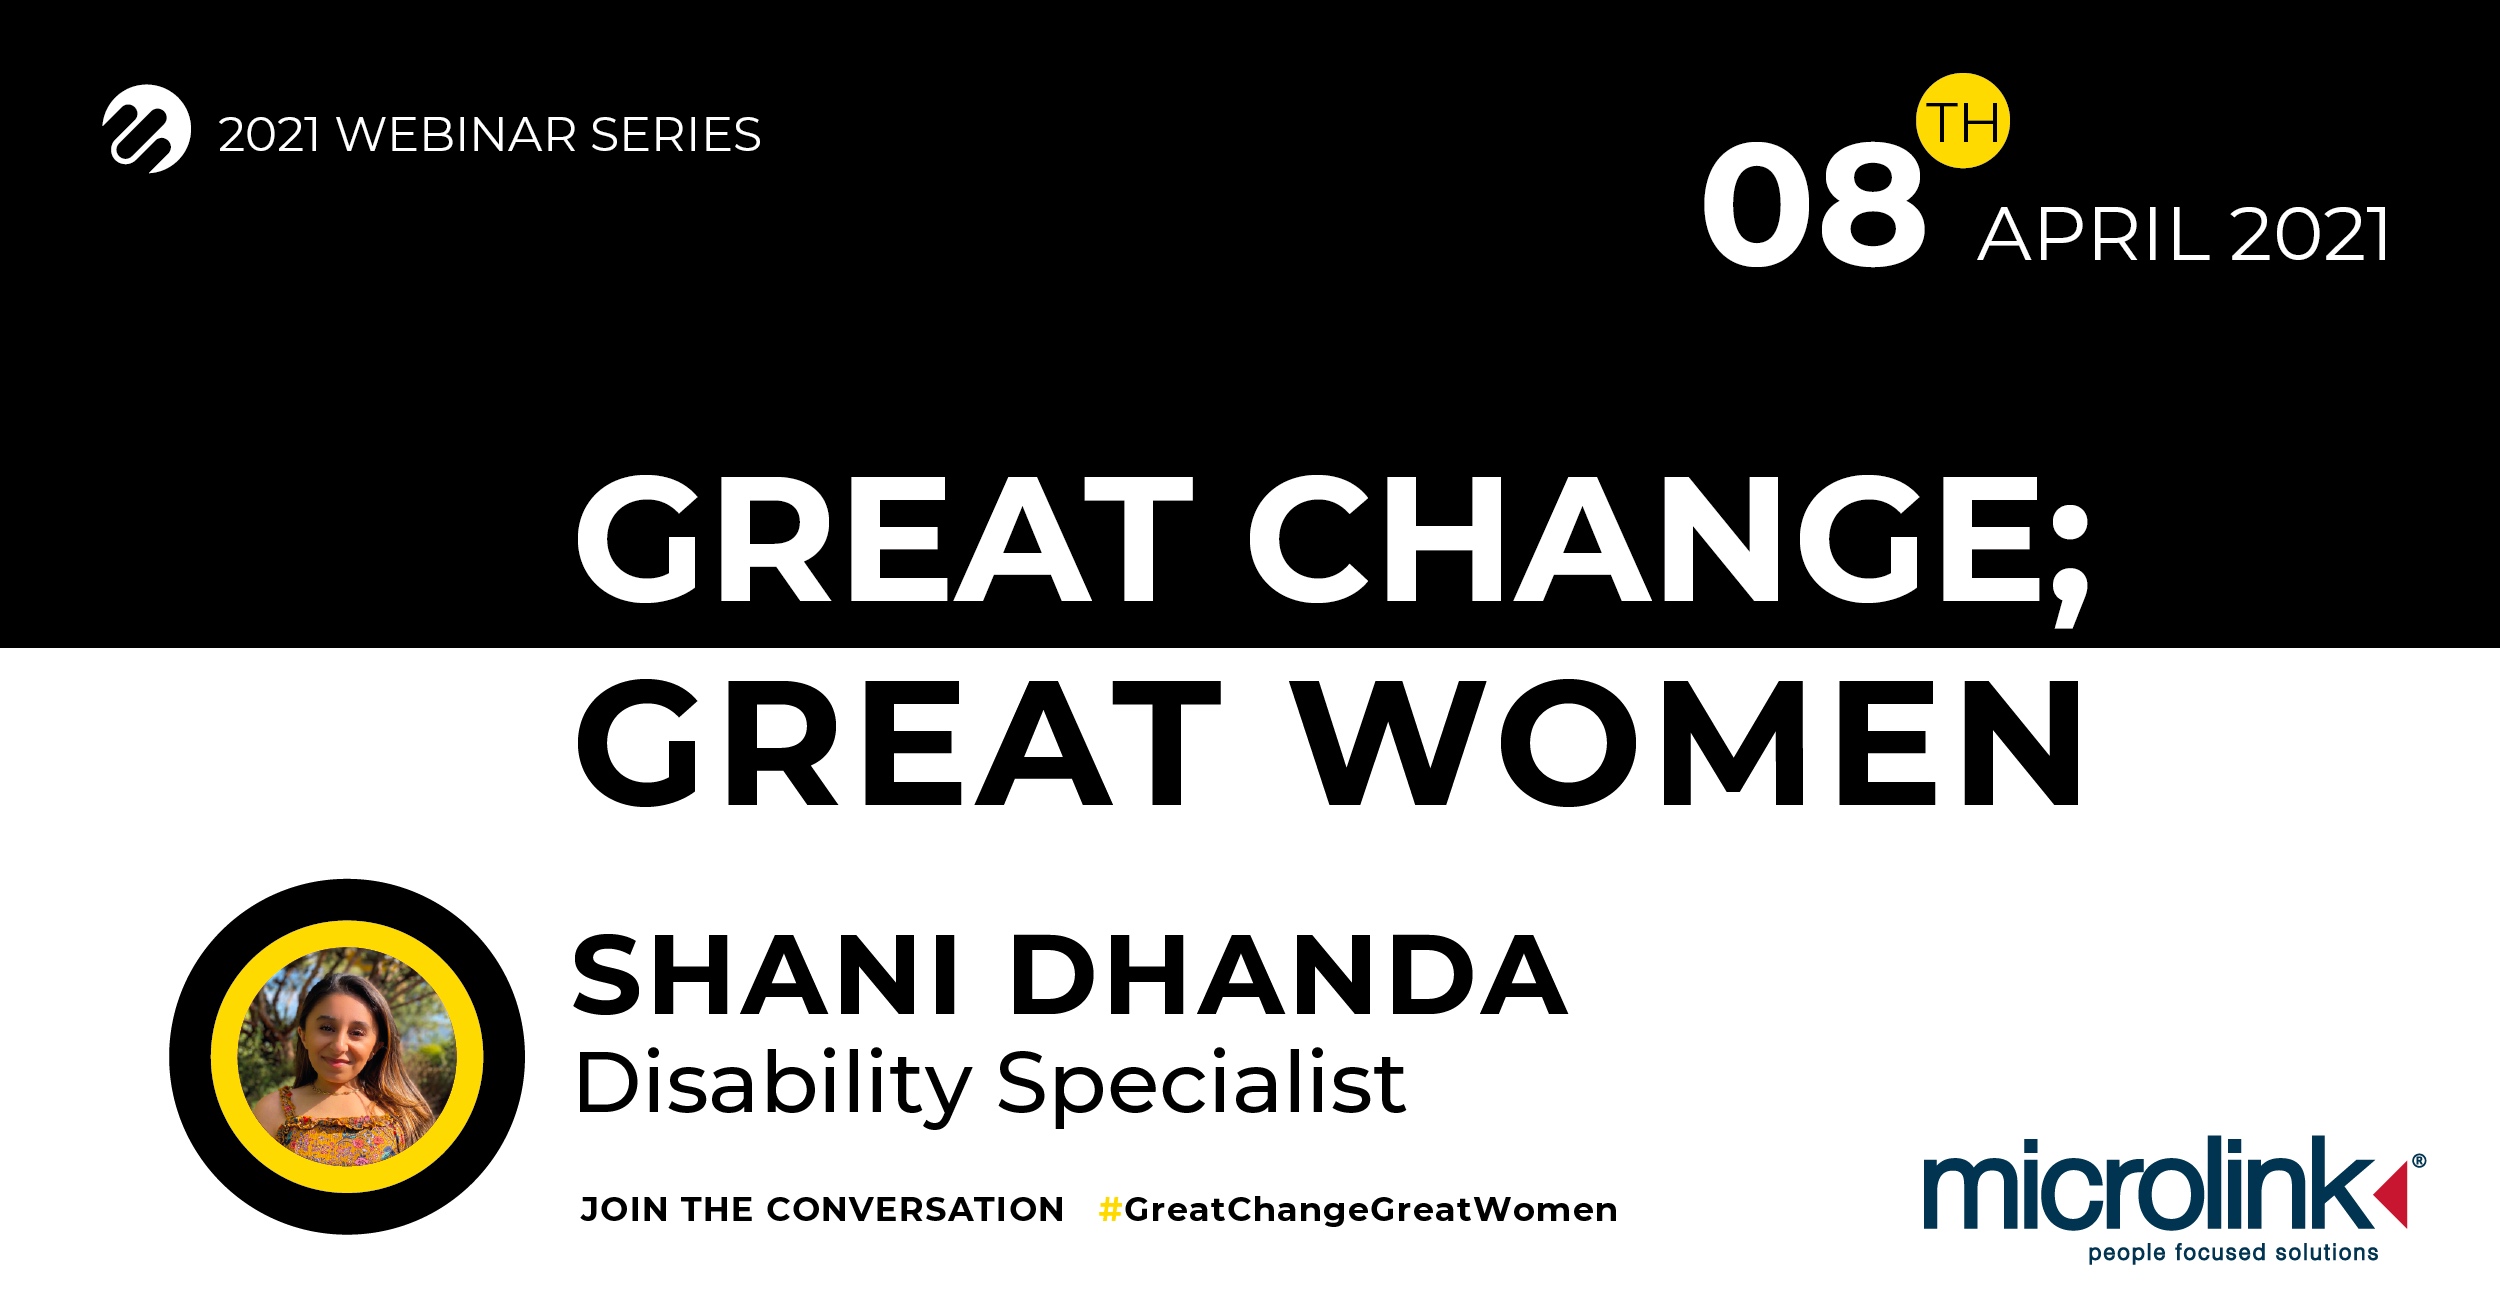 Microlink Great Change; Great Women event with Shani Dhanda